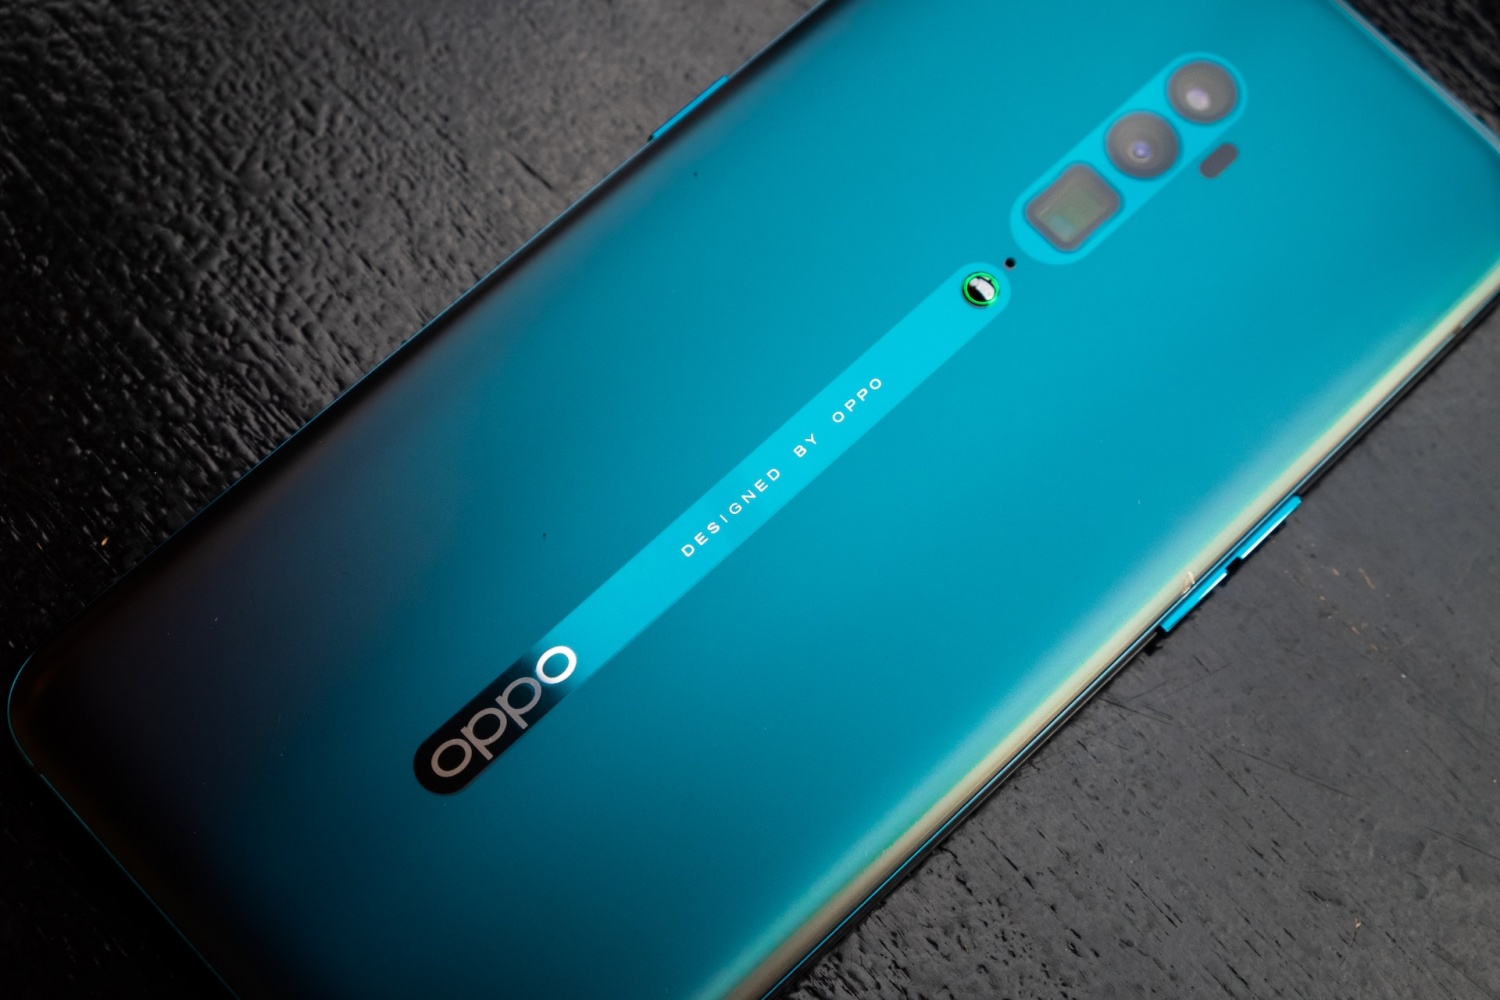 Weibo Rumors Claim OPPO Find N3 Will Have Wireless Charging Support